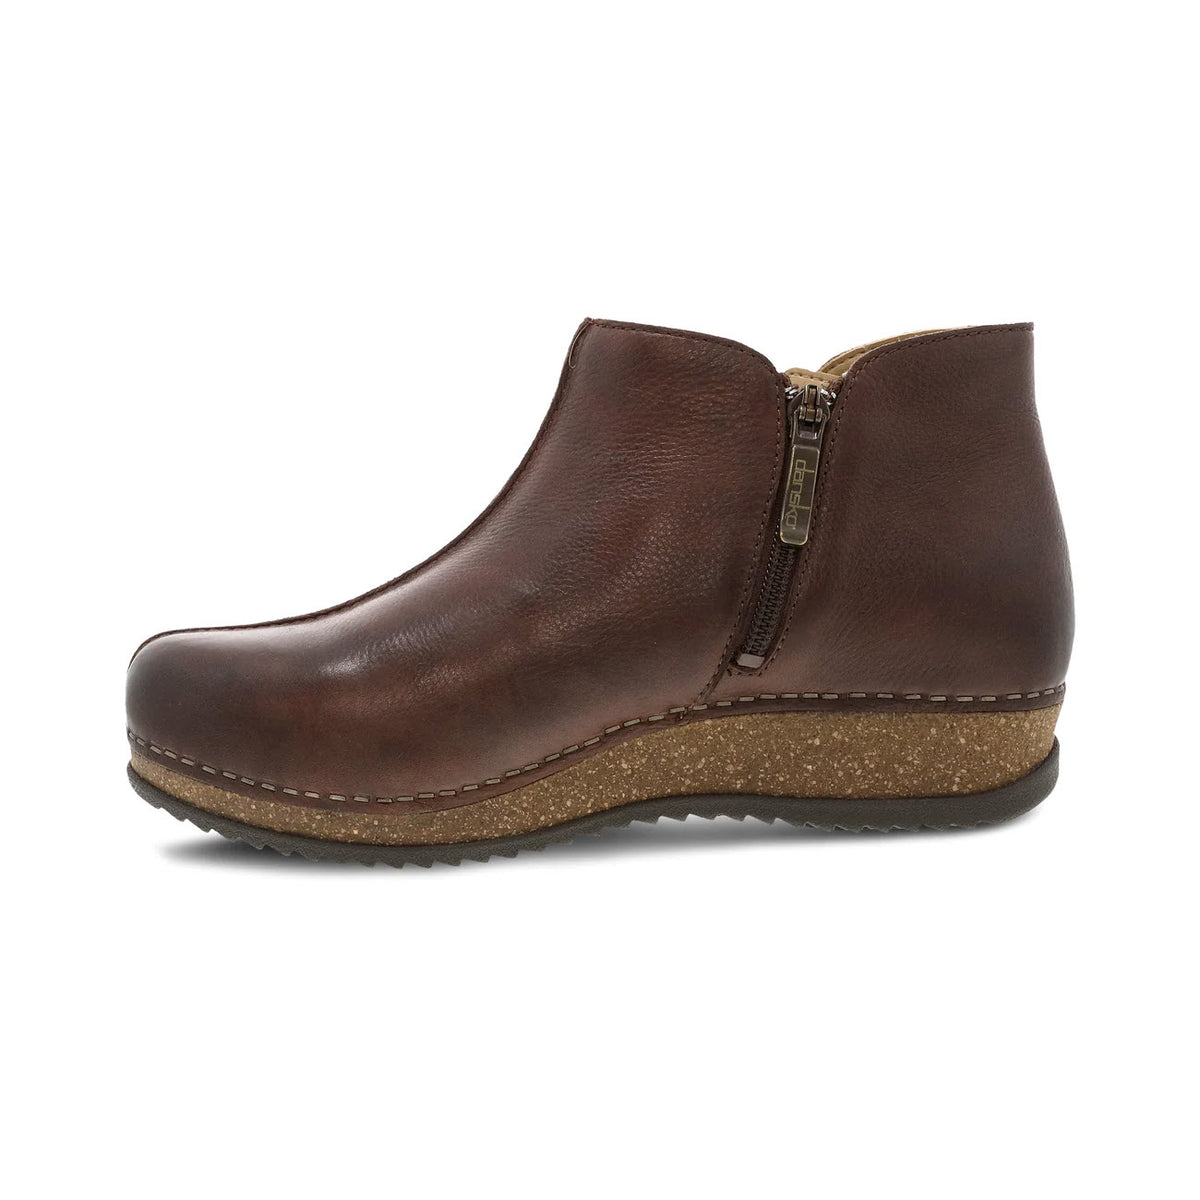 A single brown leather Dansko Makara bootie with a side zipper and a cork sole, isolated on a white background.